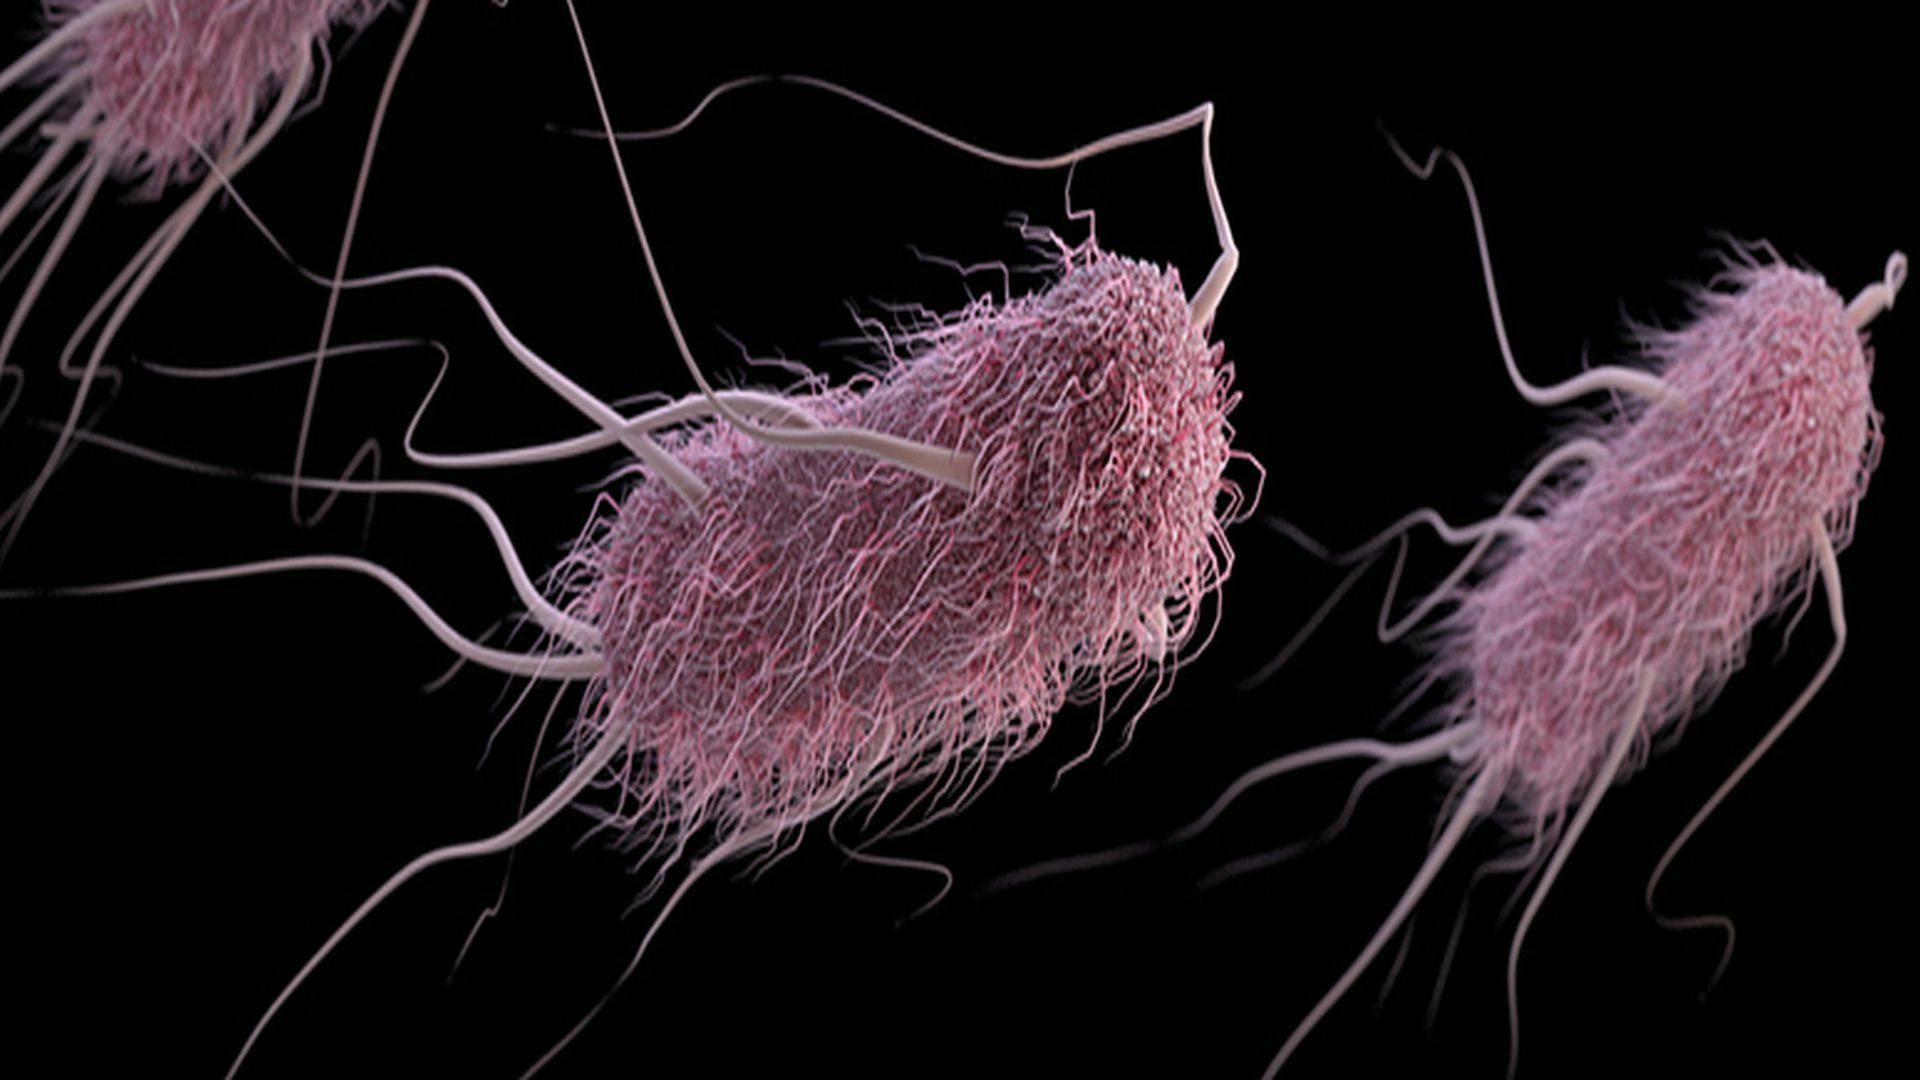 CDC Provides Update on Multistate Outbreak of E. coli O157:H7 Infections